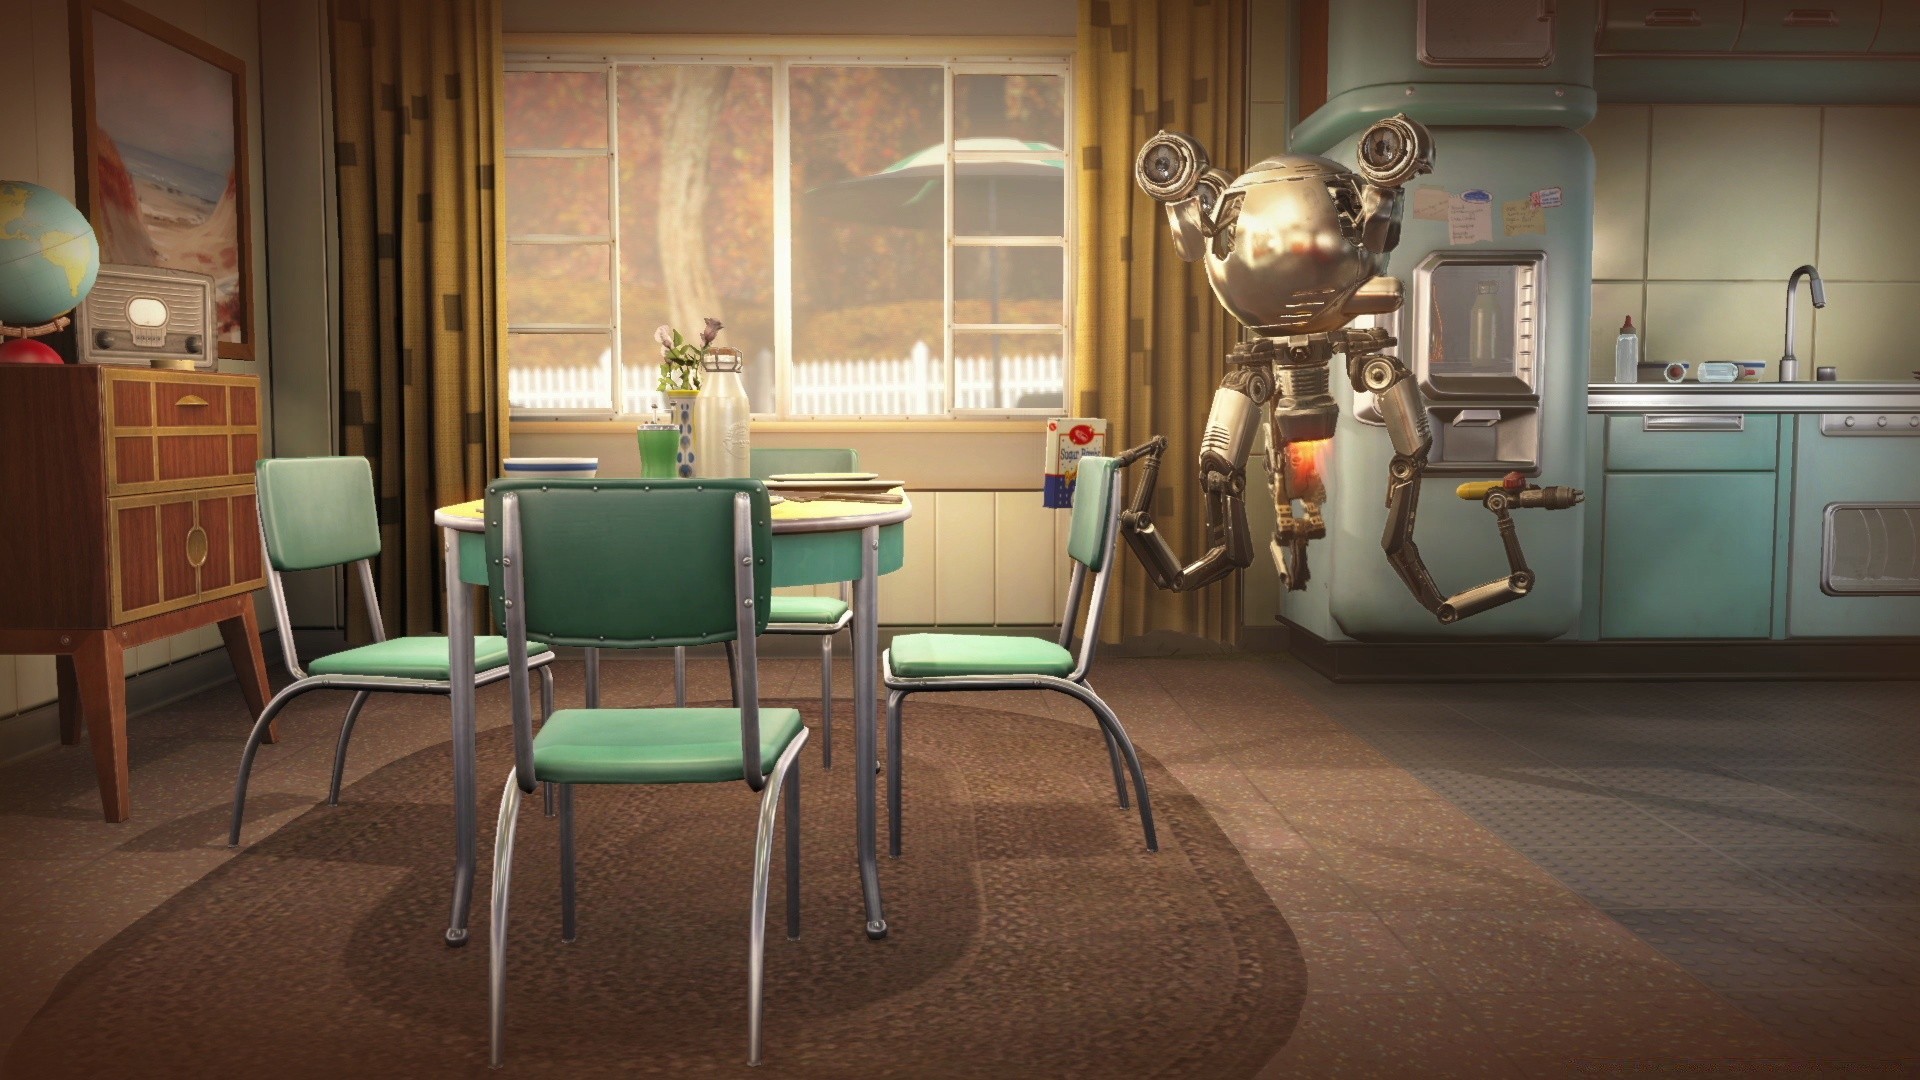 fallout furniture chair table room seat indoors interior design floor home lamp window house luxury sofa